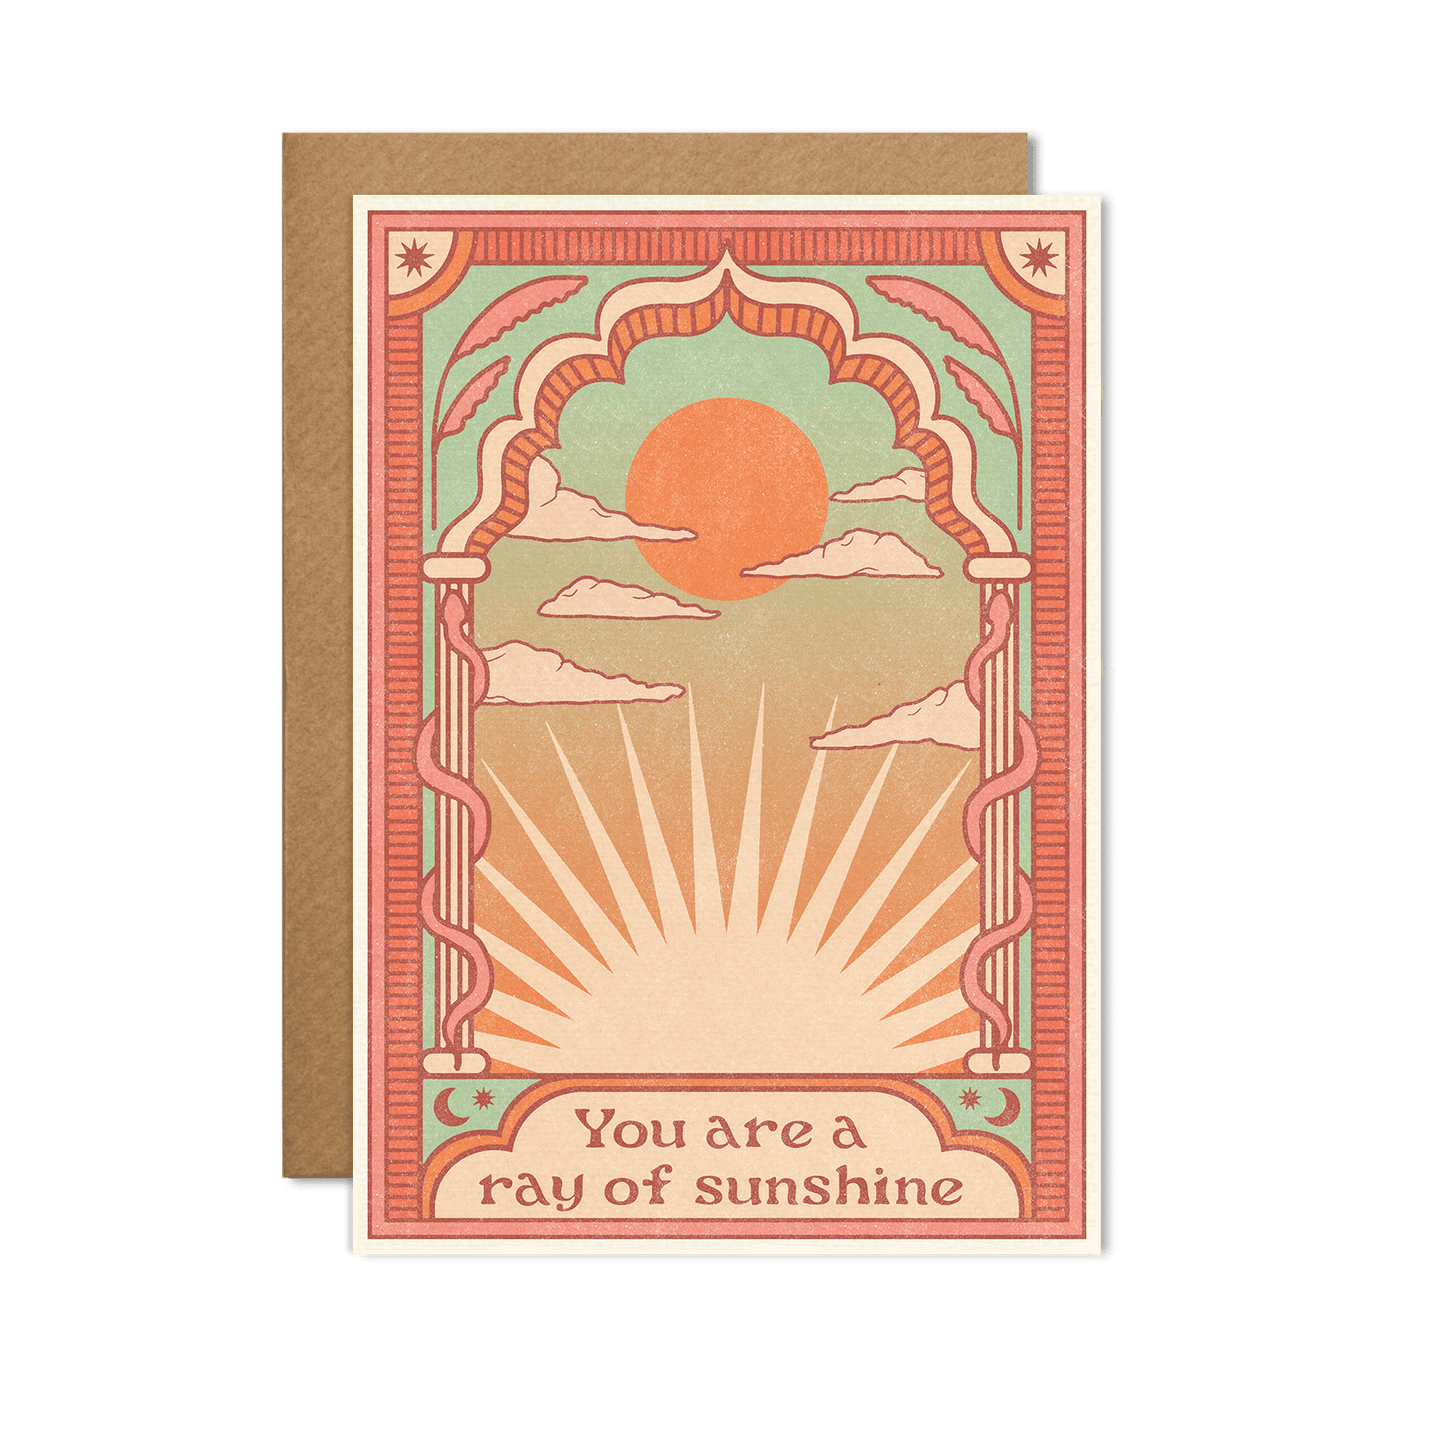 You are a ray of sunshine card